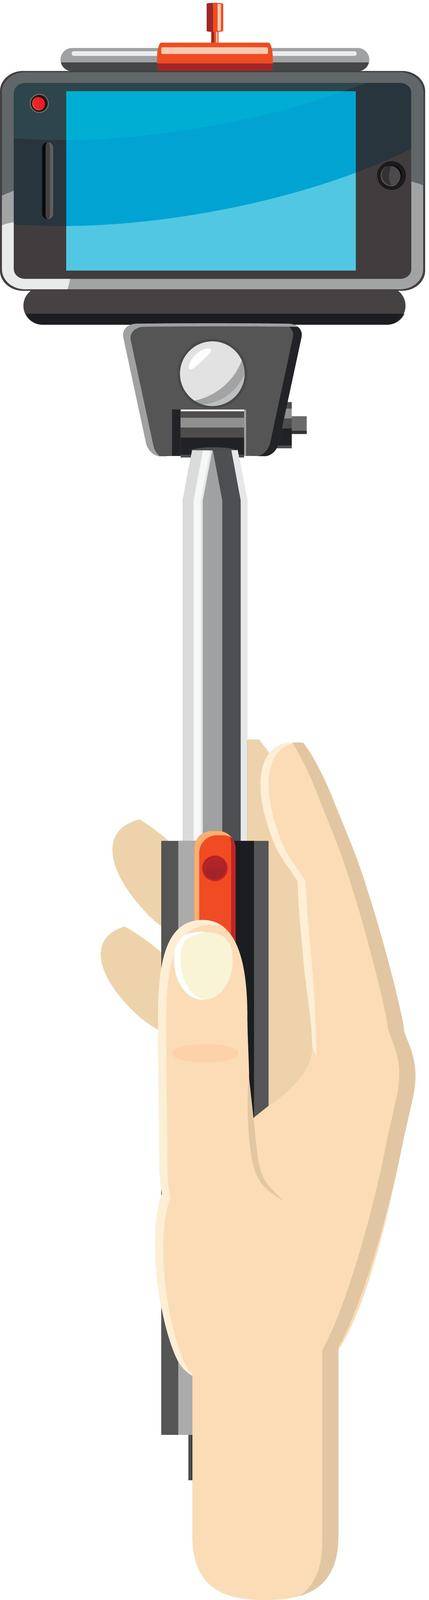 Hand holding selfie monopod stick icon by ylivdesign